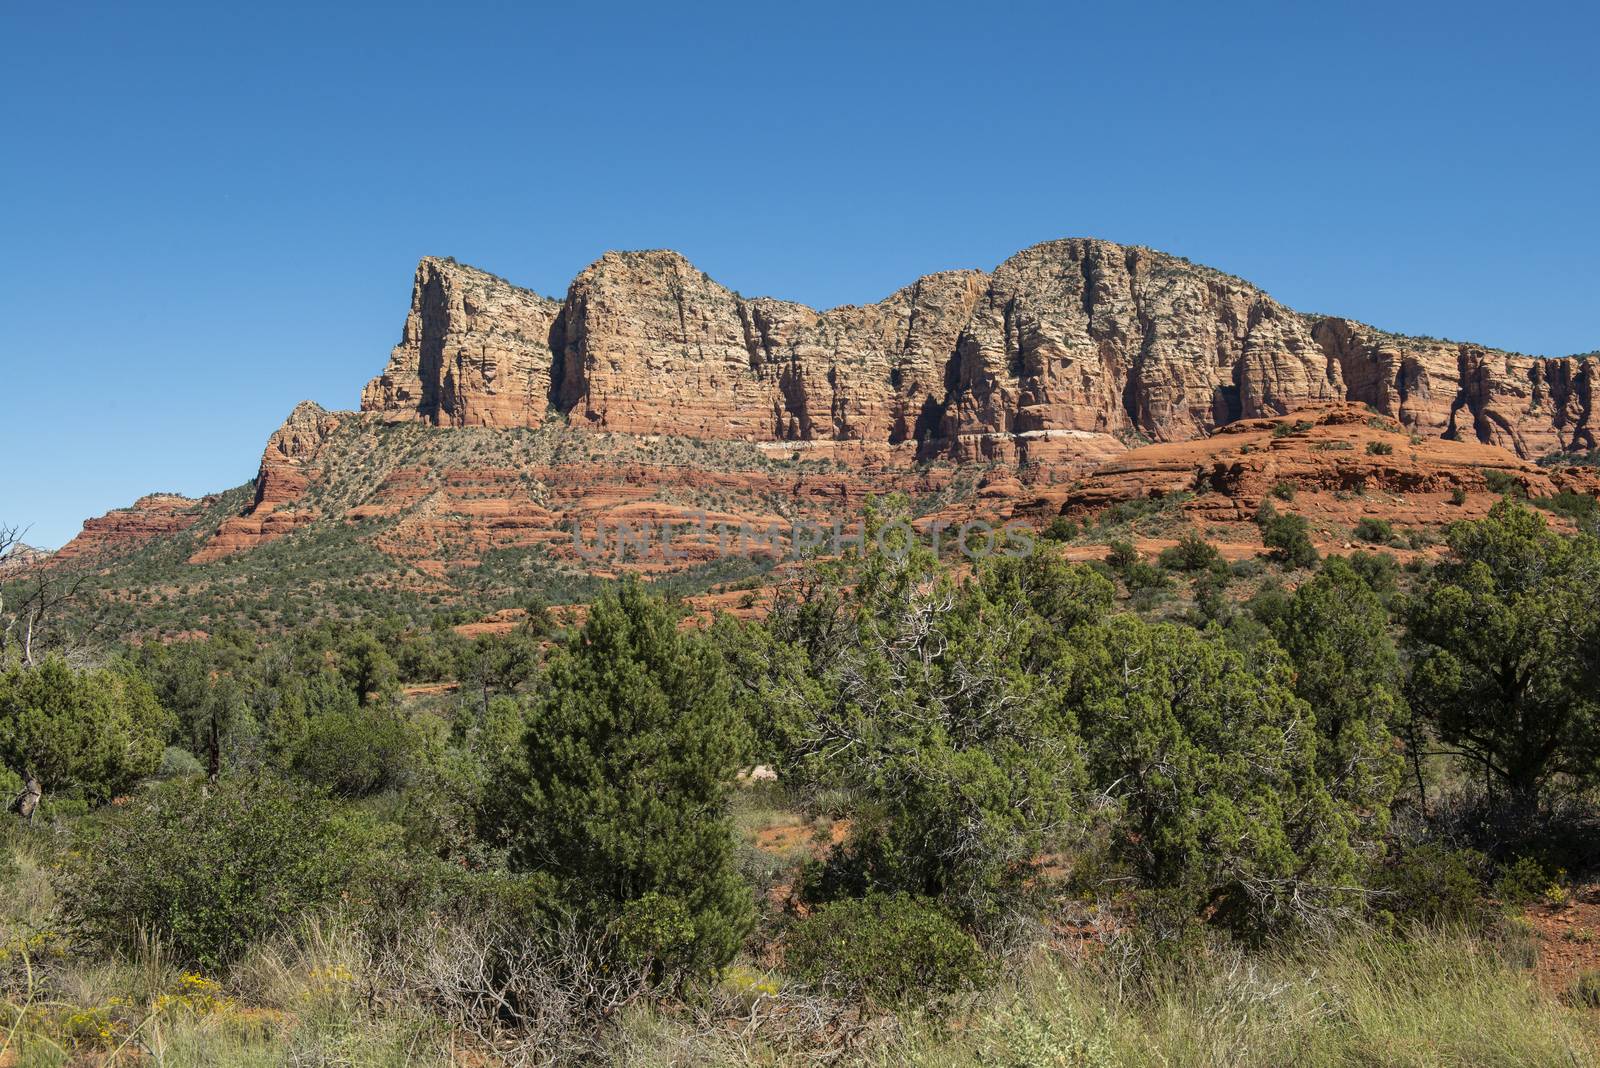 View from Red Rock Scenic Byway in Sedona, Arizona by Njean